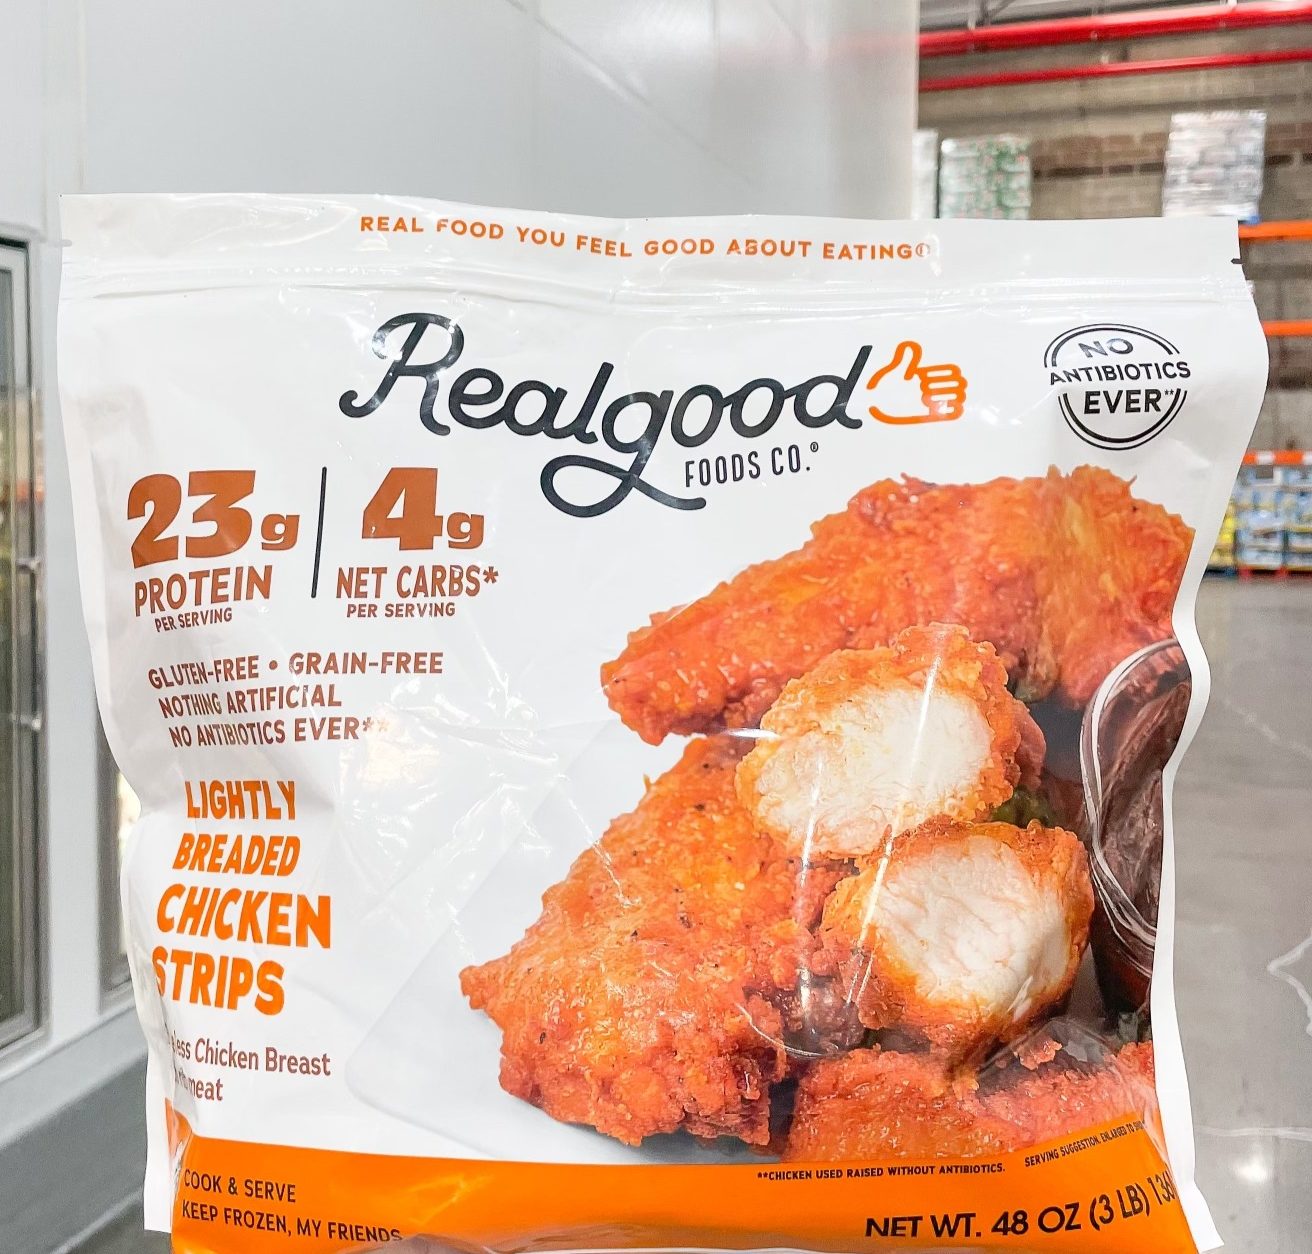 The Real Good Food Company ramps up production of frozen food